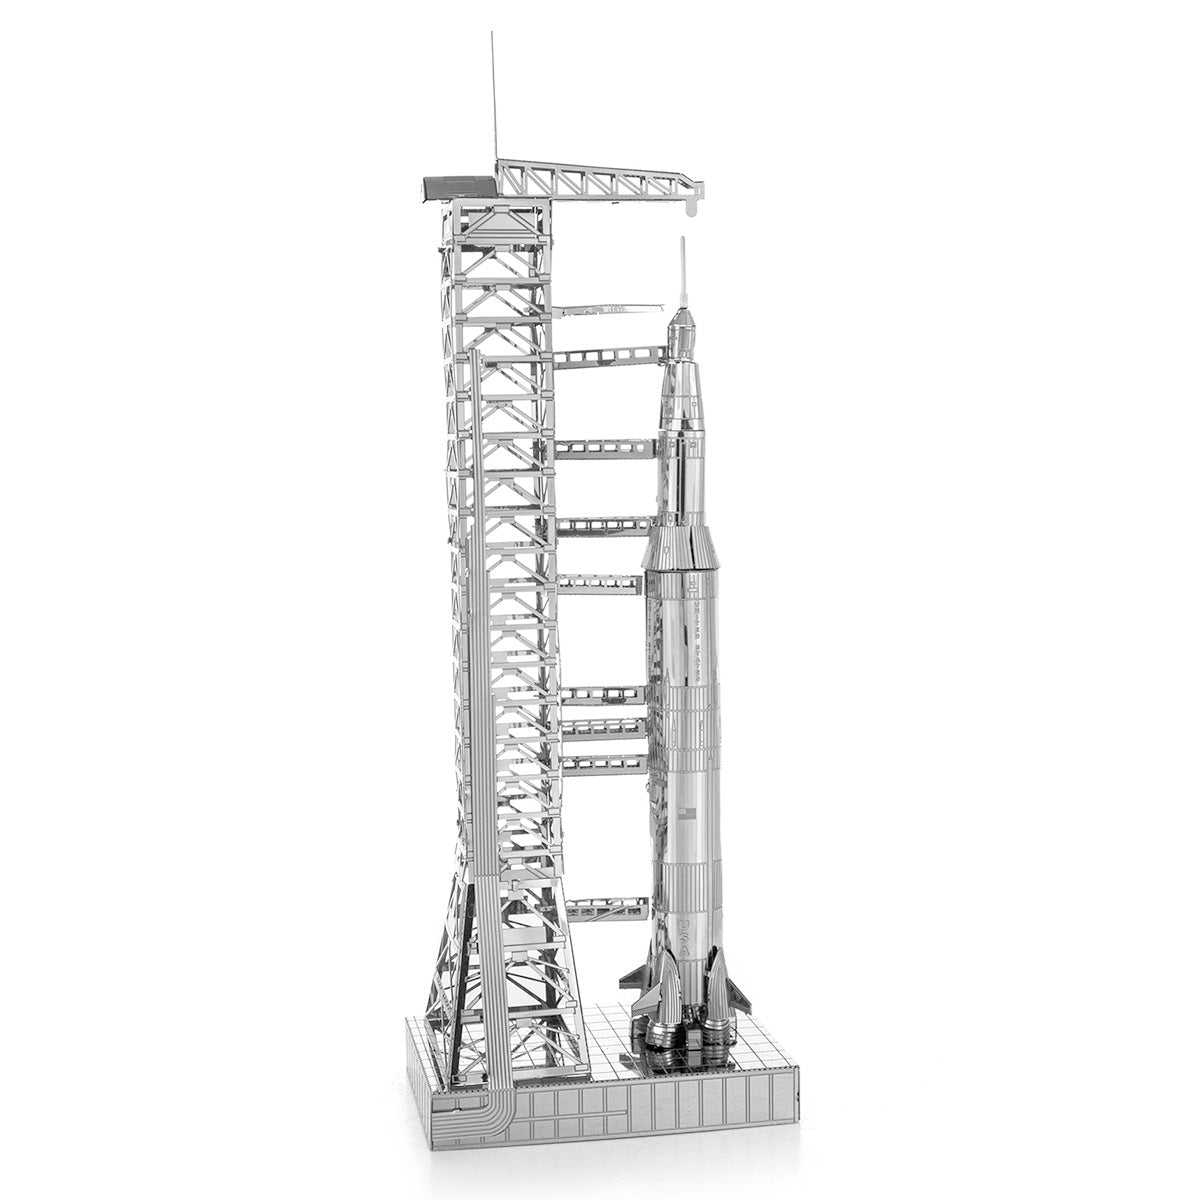 Apollo Saturn V wth Gantry 3D Model Kit - Metal Earth gift puzzle puzzle